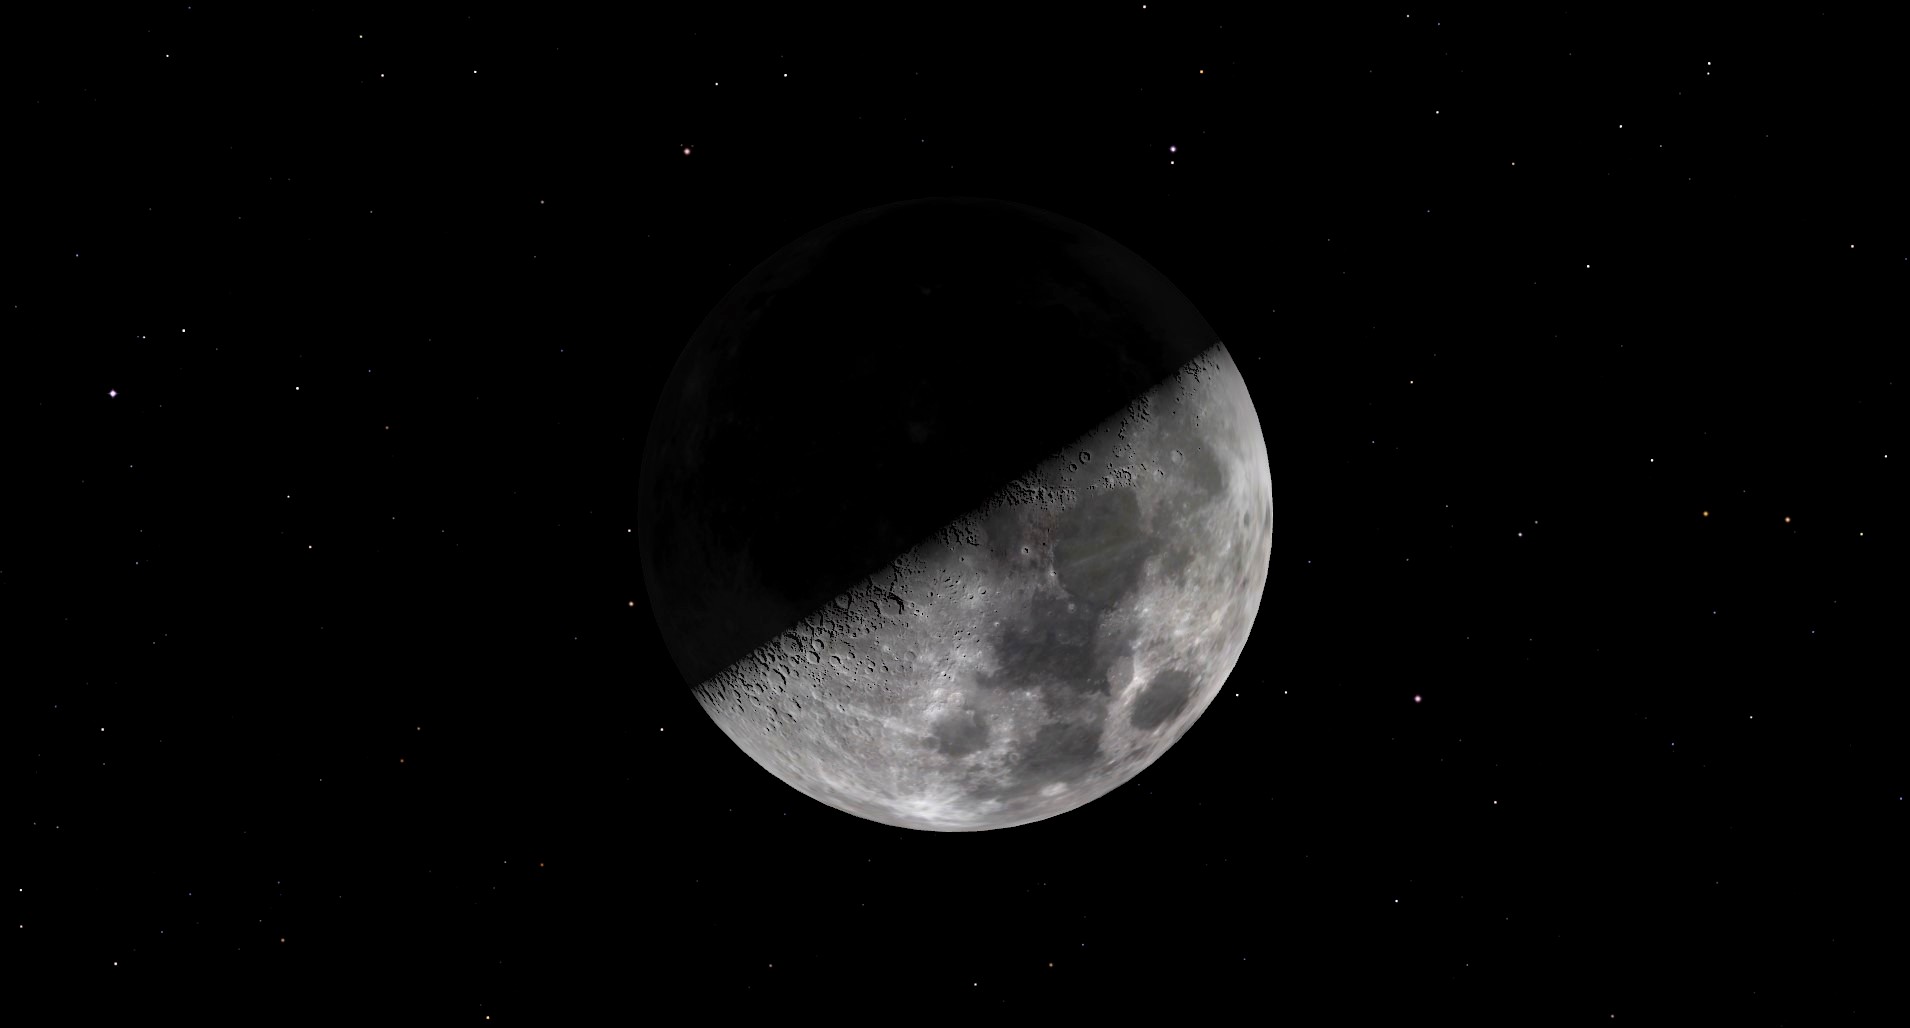 The moon will complete the first quarter of its journey around Earth on Sunday, October 22 at 03:29 GMT.